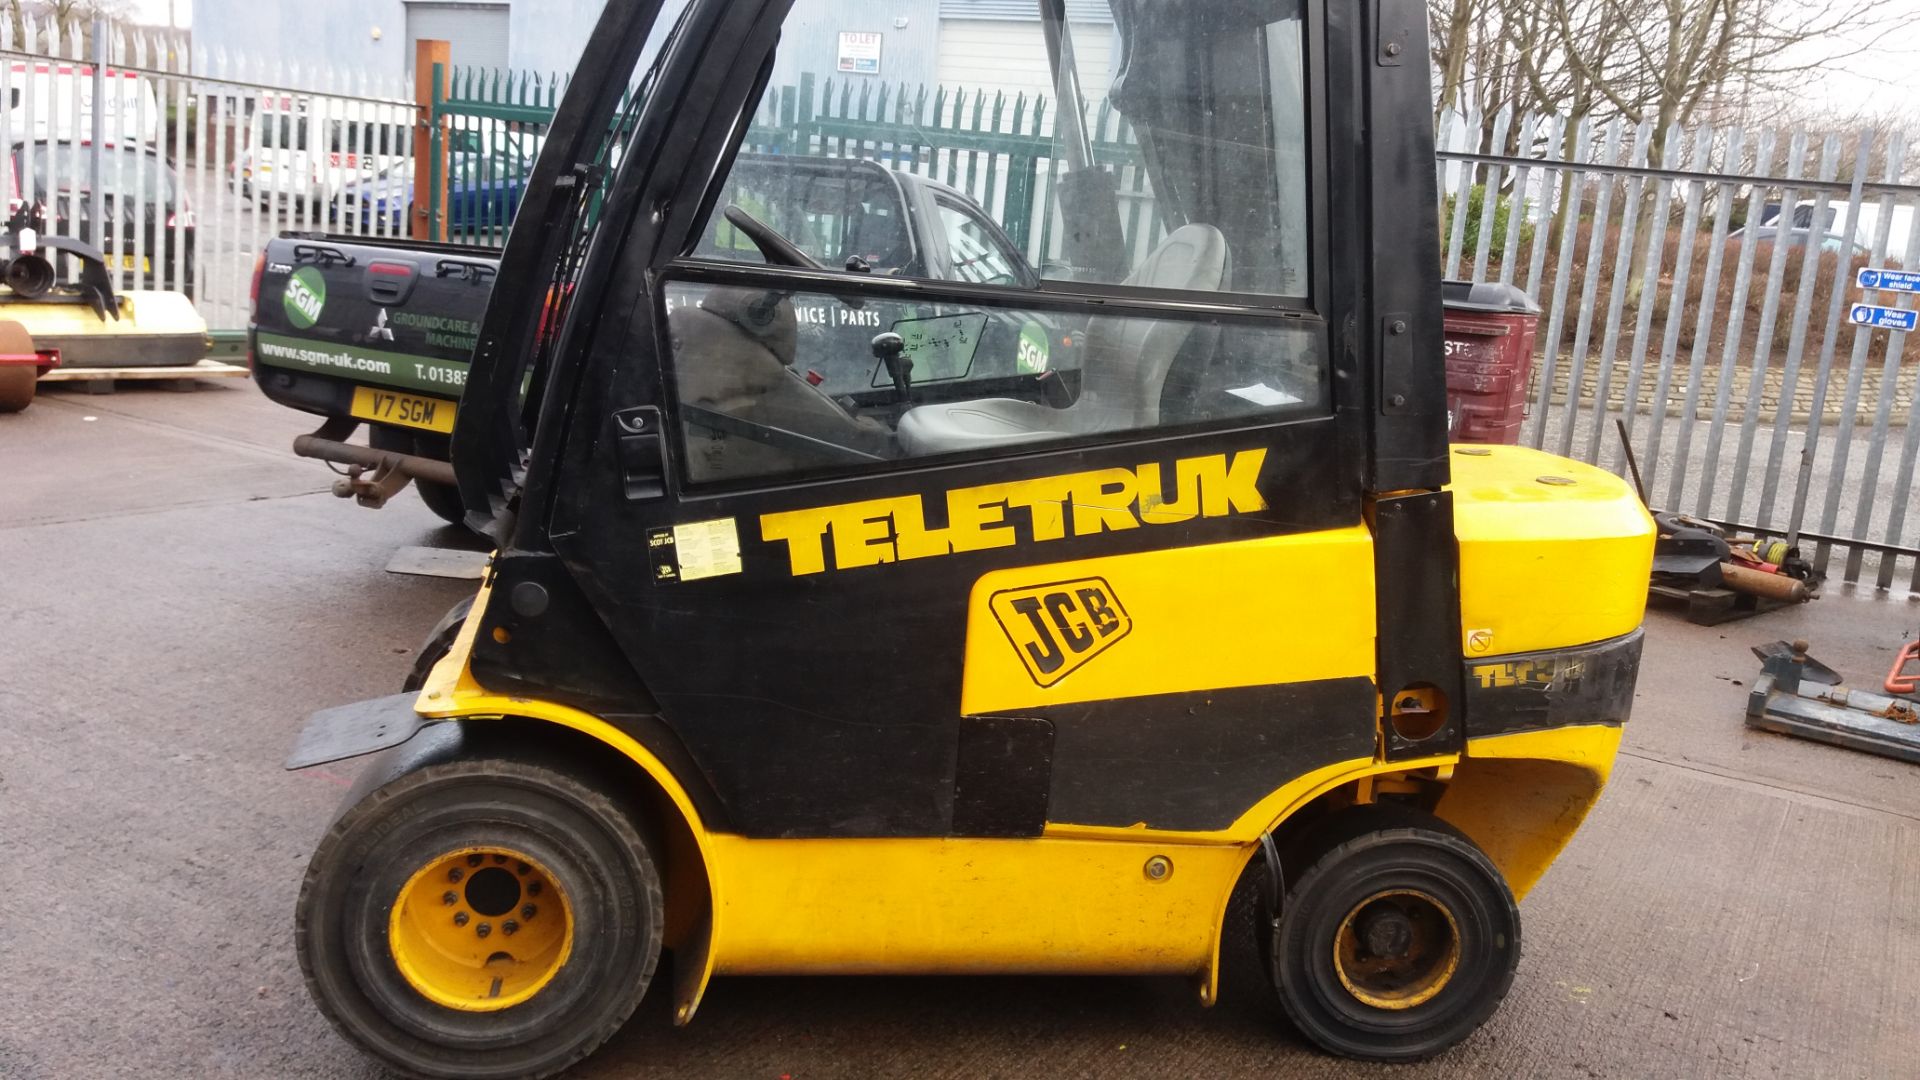 JCB TLT30 Teletruk counterbalance forklift with telescopic boom - Image 18 of 22